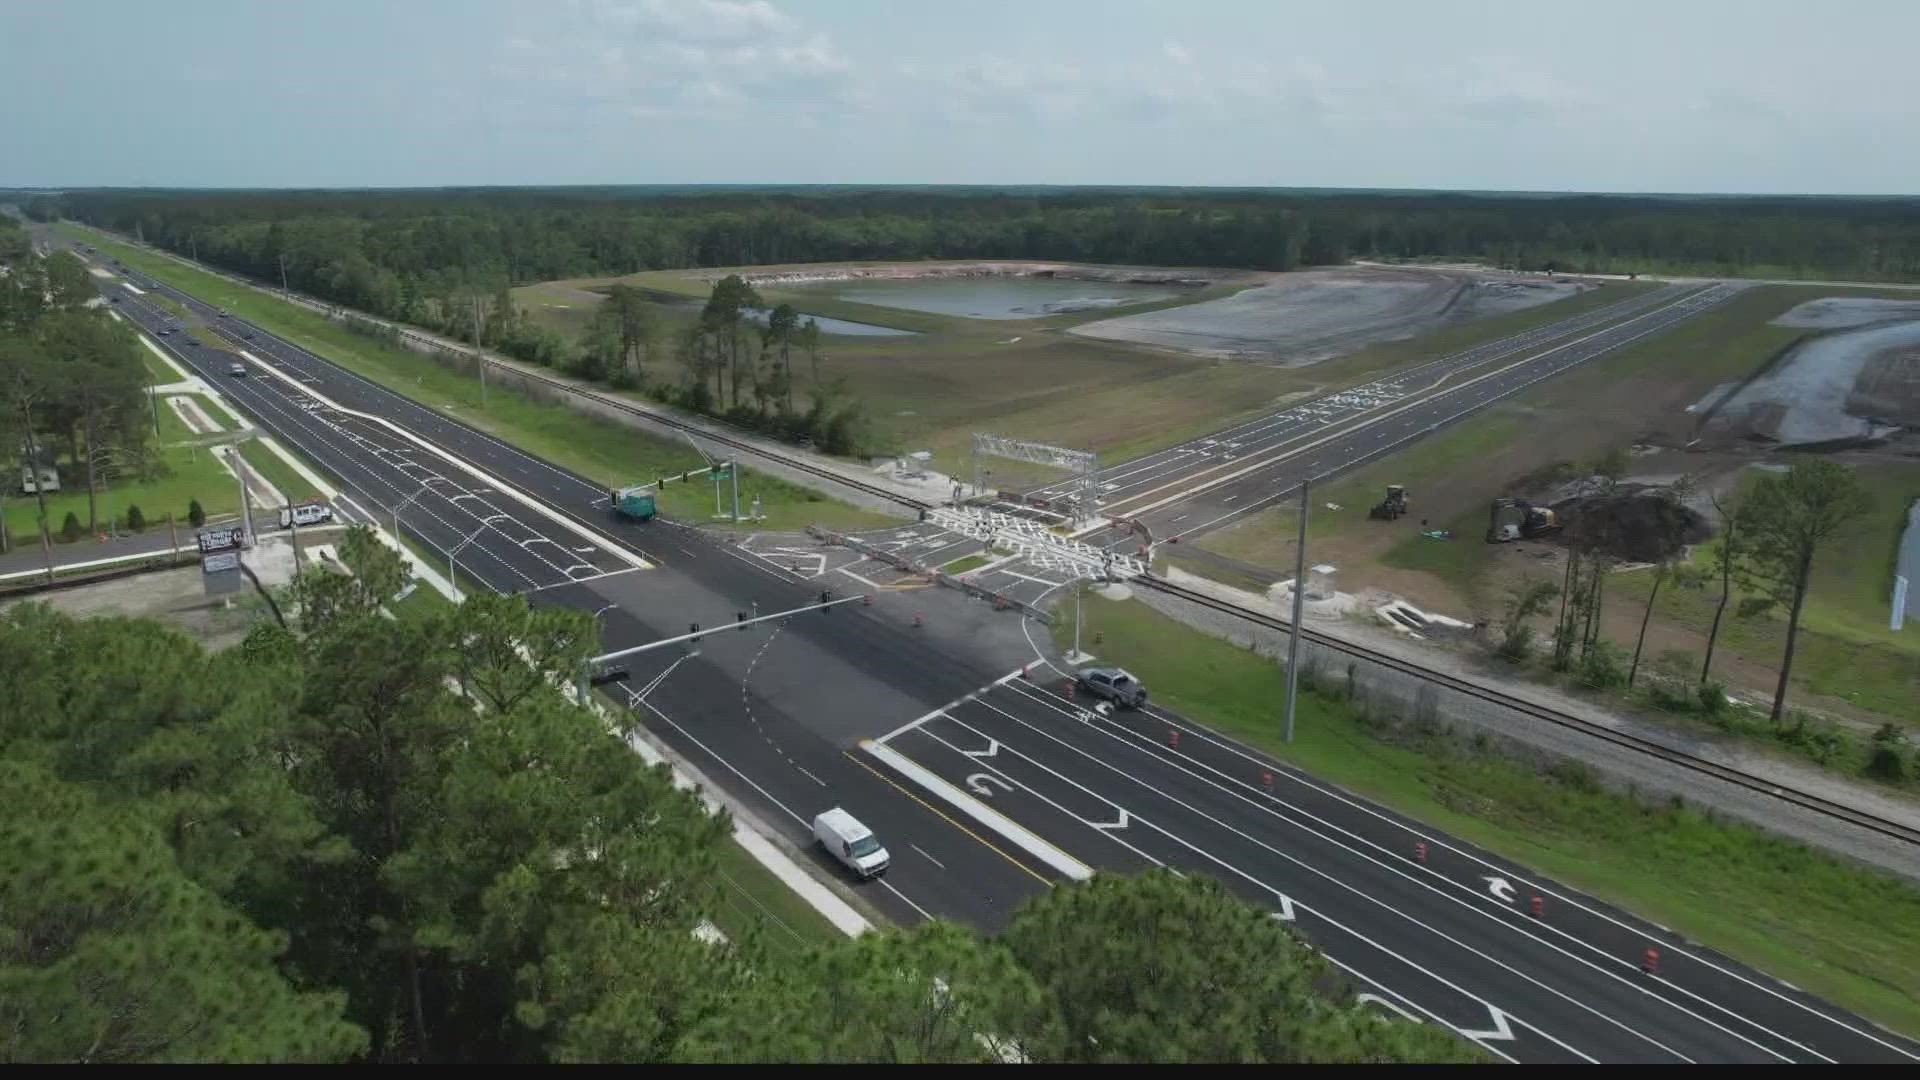 Brand new highway being built to help lessen the crowding on St. Johns County roads - SR-313. Some are not sure it will help.